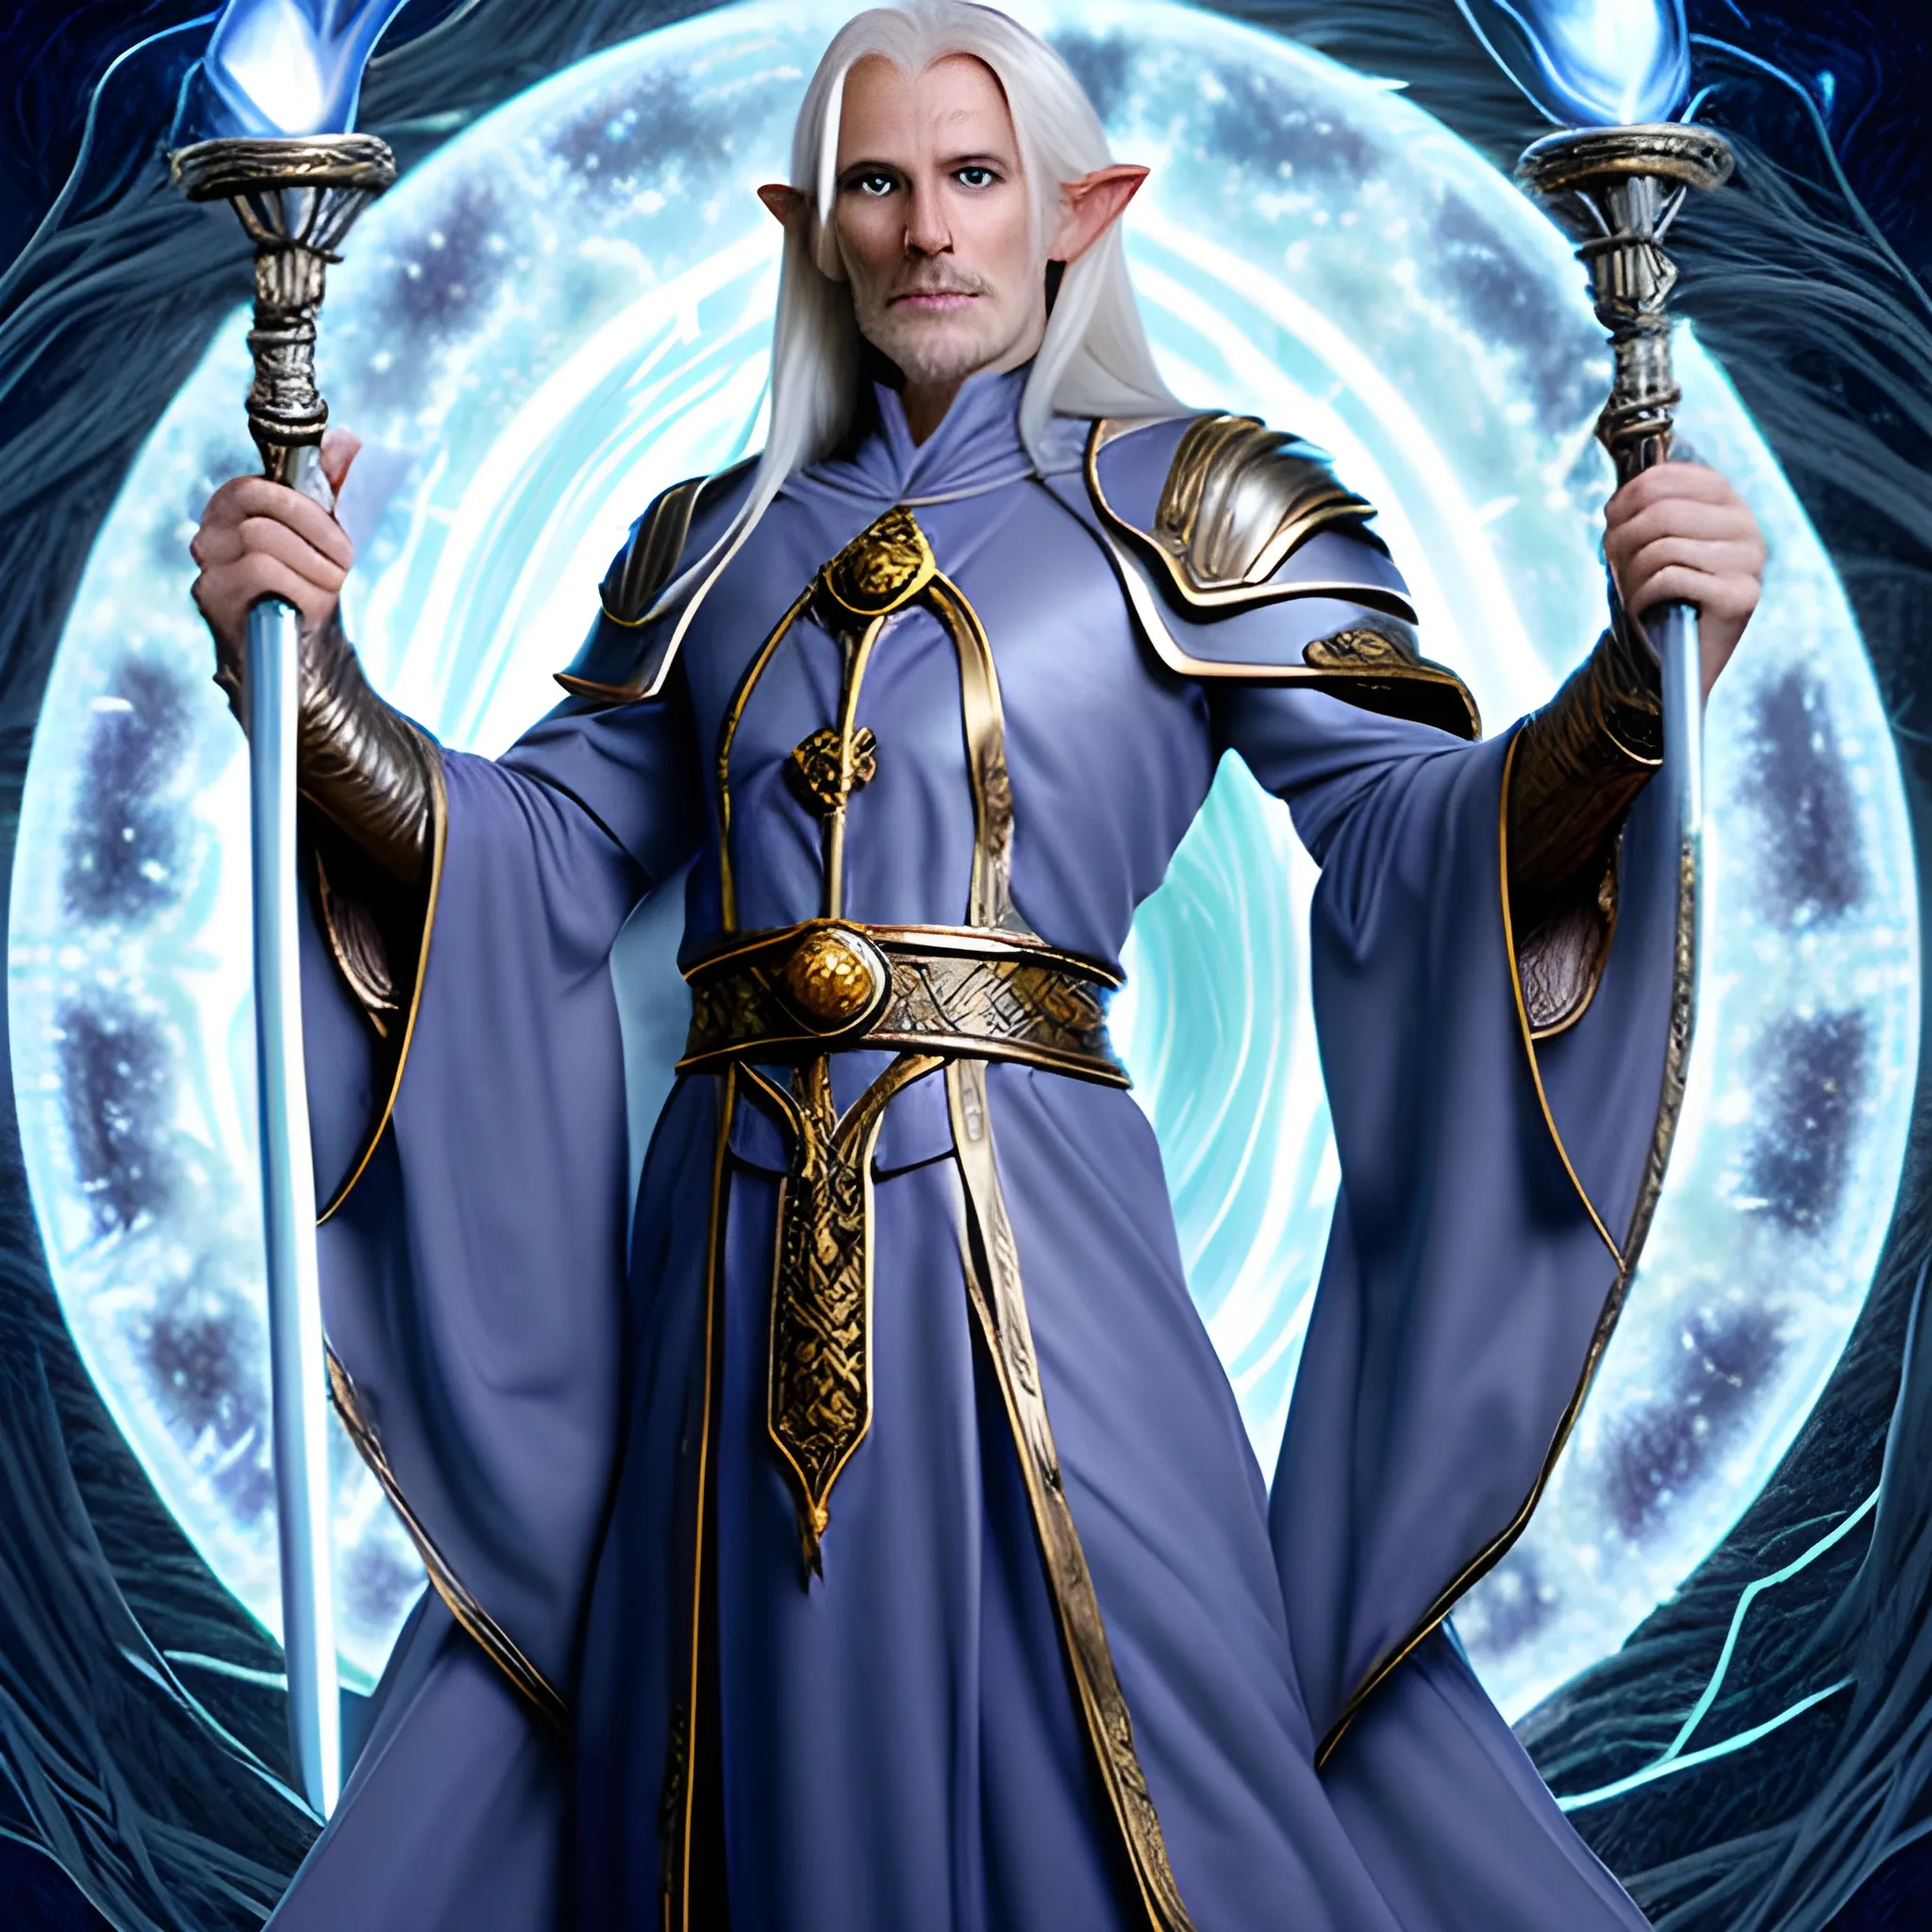 Lord Elric stands tall and regal, his elven lineage evident in every refined feature. His ageless face bears the grace and sharpness typical of the High-Elf race. His fair skin, smooth and unblemished, possesses a subtle ethereal glow, hinting at the depths of his magical prowess.

Eyes of vibrant sapphire gaze out from beneath gracefully arched eyebrows, shimmering with a combination of curiosity and deep knowledge. They seem to hold the wisdom of centuries, reflecting the vast reservoirs of arcane understanding that Lord Elric possesses.

Silvery-white hair cascades down his back, flowing like a shimmering waterfall. It is meticulously maintained, with not a strand out of place, representing both his meticulous nature and the pride he takes in his appearance. The hair seems to catch the light, casting a faint glow that adds to his ethereal aura.

Lord Elric's attire is a testament to his status and magical prowess. He adorns himself in flowing robes of deep cobalt blue, adorned with intricate silver embroidery that depicts ancient arcane symbols and magical sigils. The robes seem to ripple with subtle energy, hinting at the magical power contained within them.

A staff, carved from a gnarled and enchanted branch of an ancient oak, rests in his hand. The staff emanates a faint, pulsating aura, resonating with the very essence of magic. It serves both as a symbol of Lord Elric's authority and as a conduit for his spells.

Lord Elric Brightwood's overall appearance combines the elegance and timeless beauty of the High-Elf race with the aura of arcane knowledge and power that comes with his mastery of wizardry. His presence commands respect, embodying the archetype of a wise and formidable spellcaster.